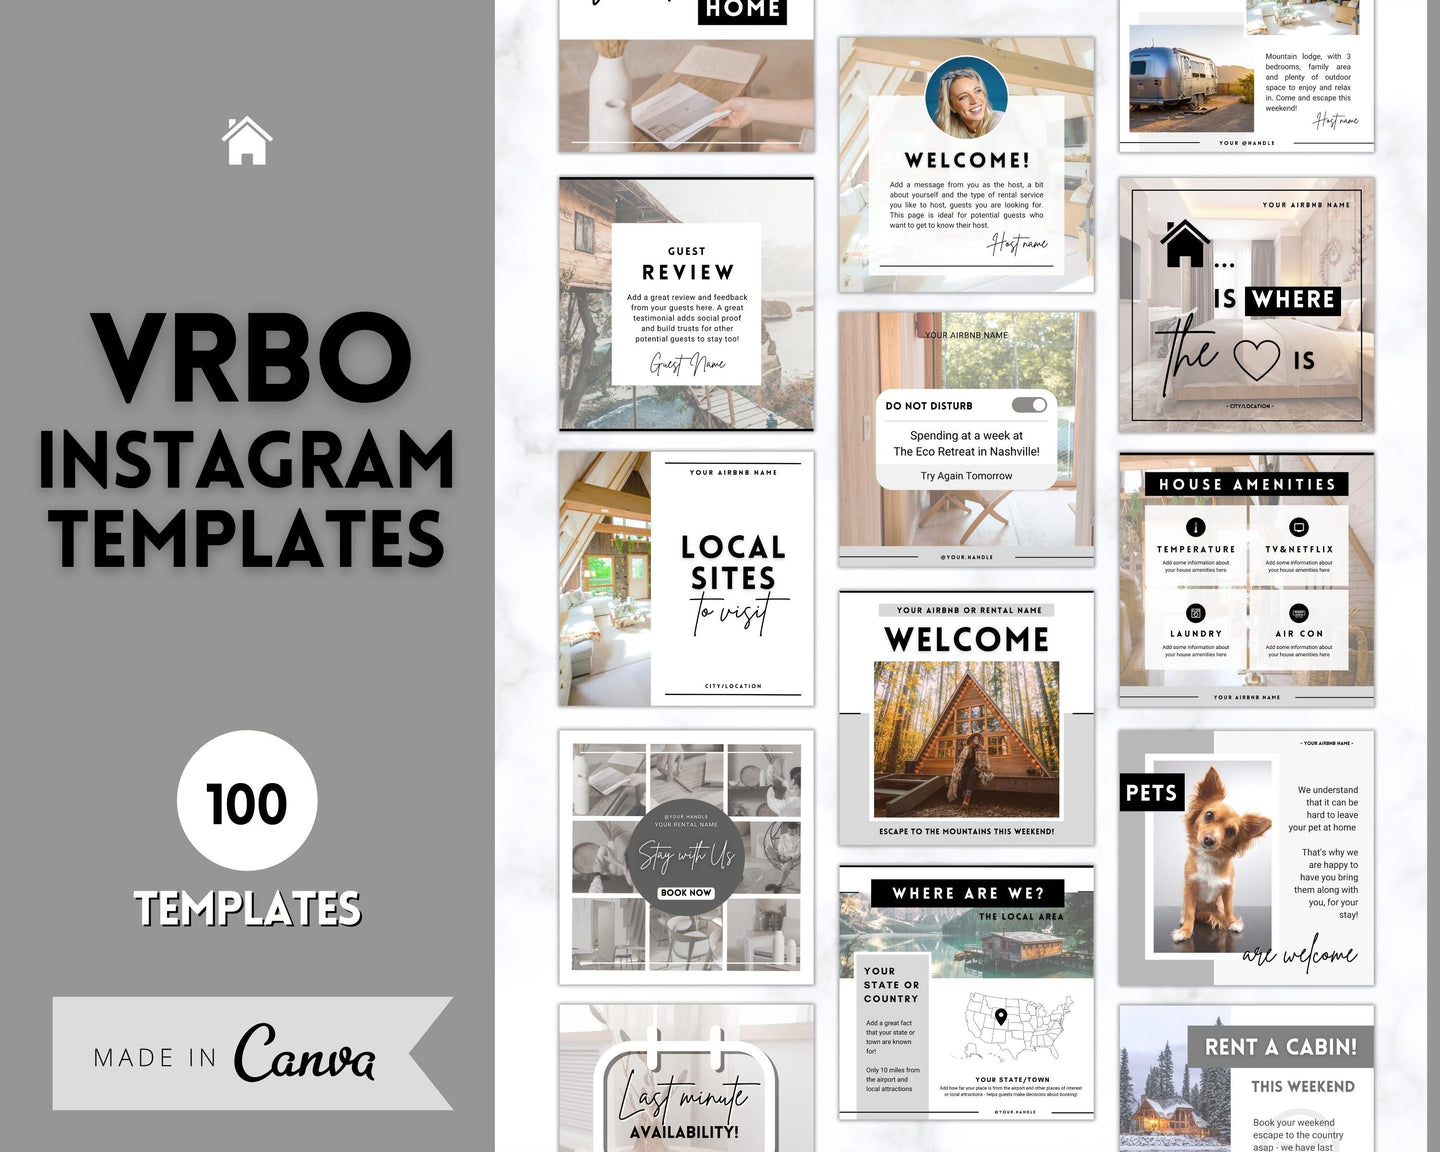 VRBO Template for Instagram! Editable Social Media Posts, Canva, Airbnb, Super host signs, Signage, Air bnb Vacation Rental, Welcome Book | Lovelo Mono